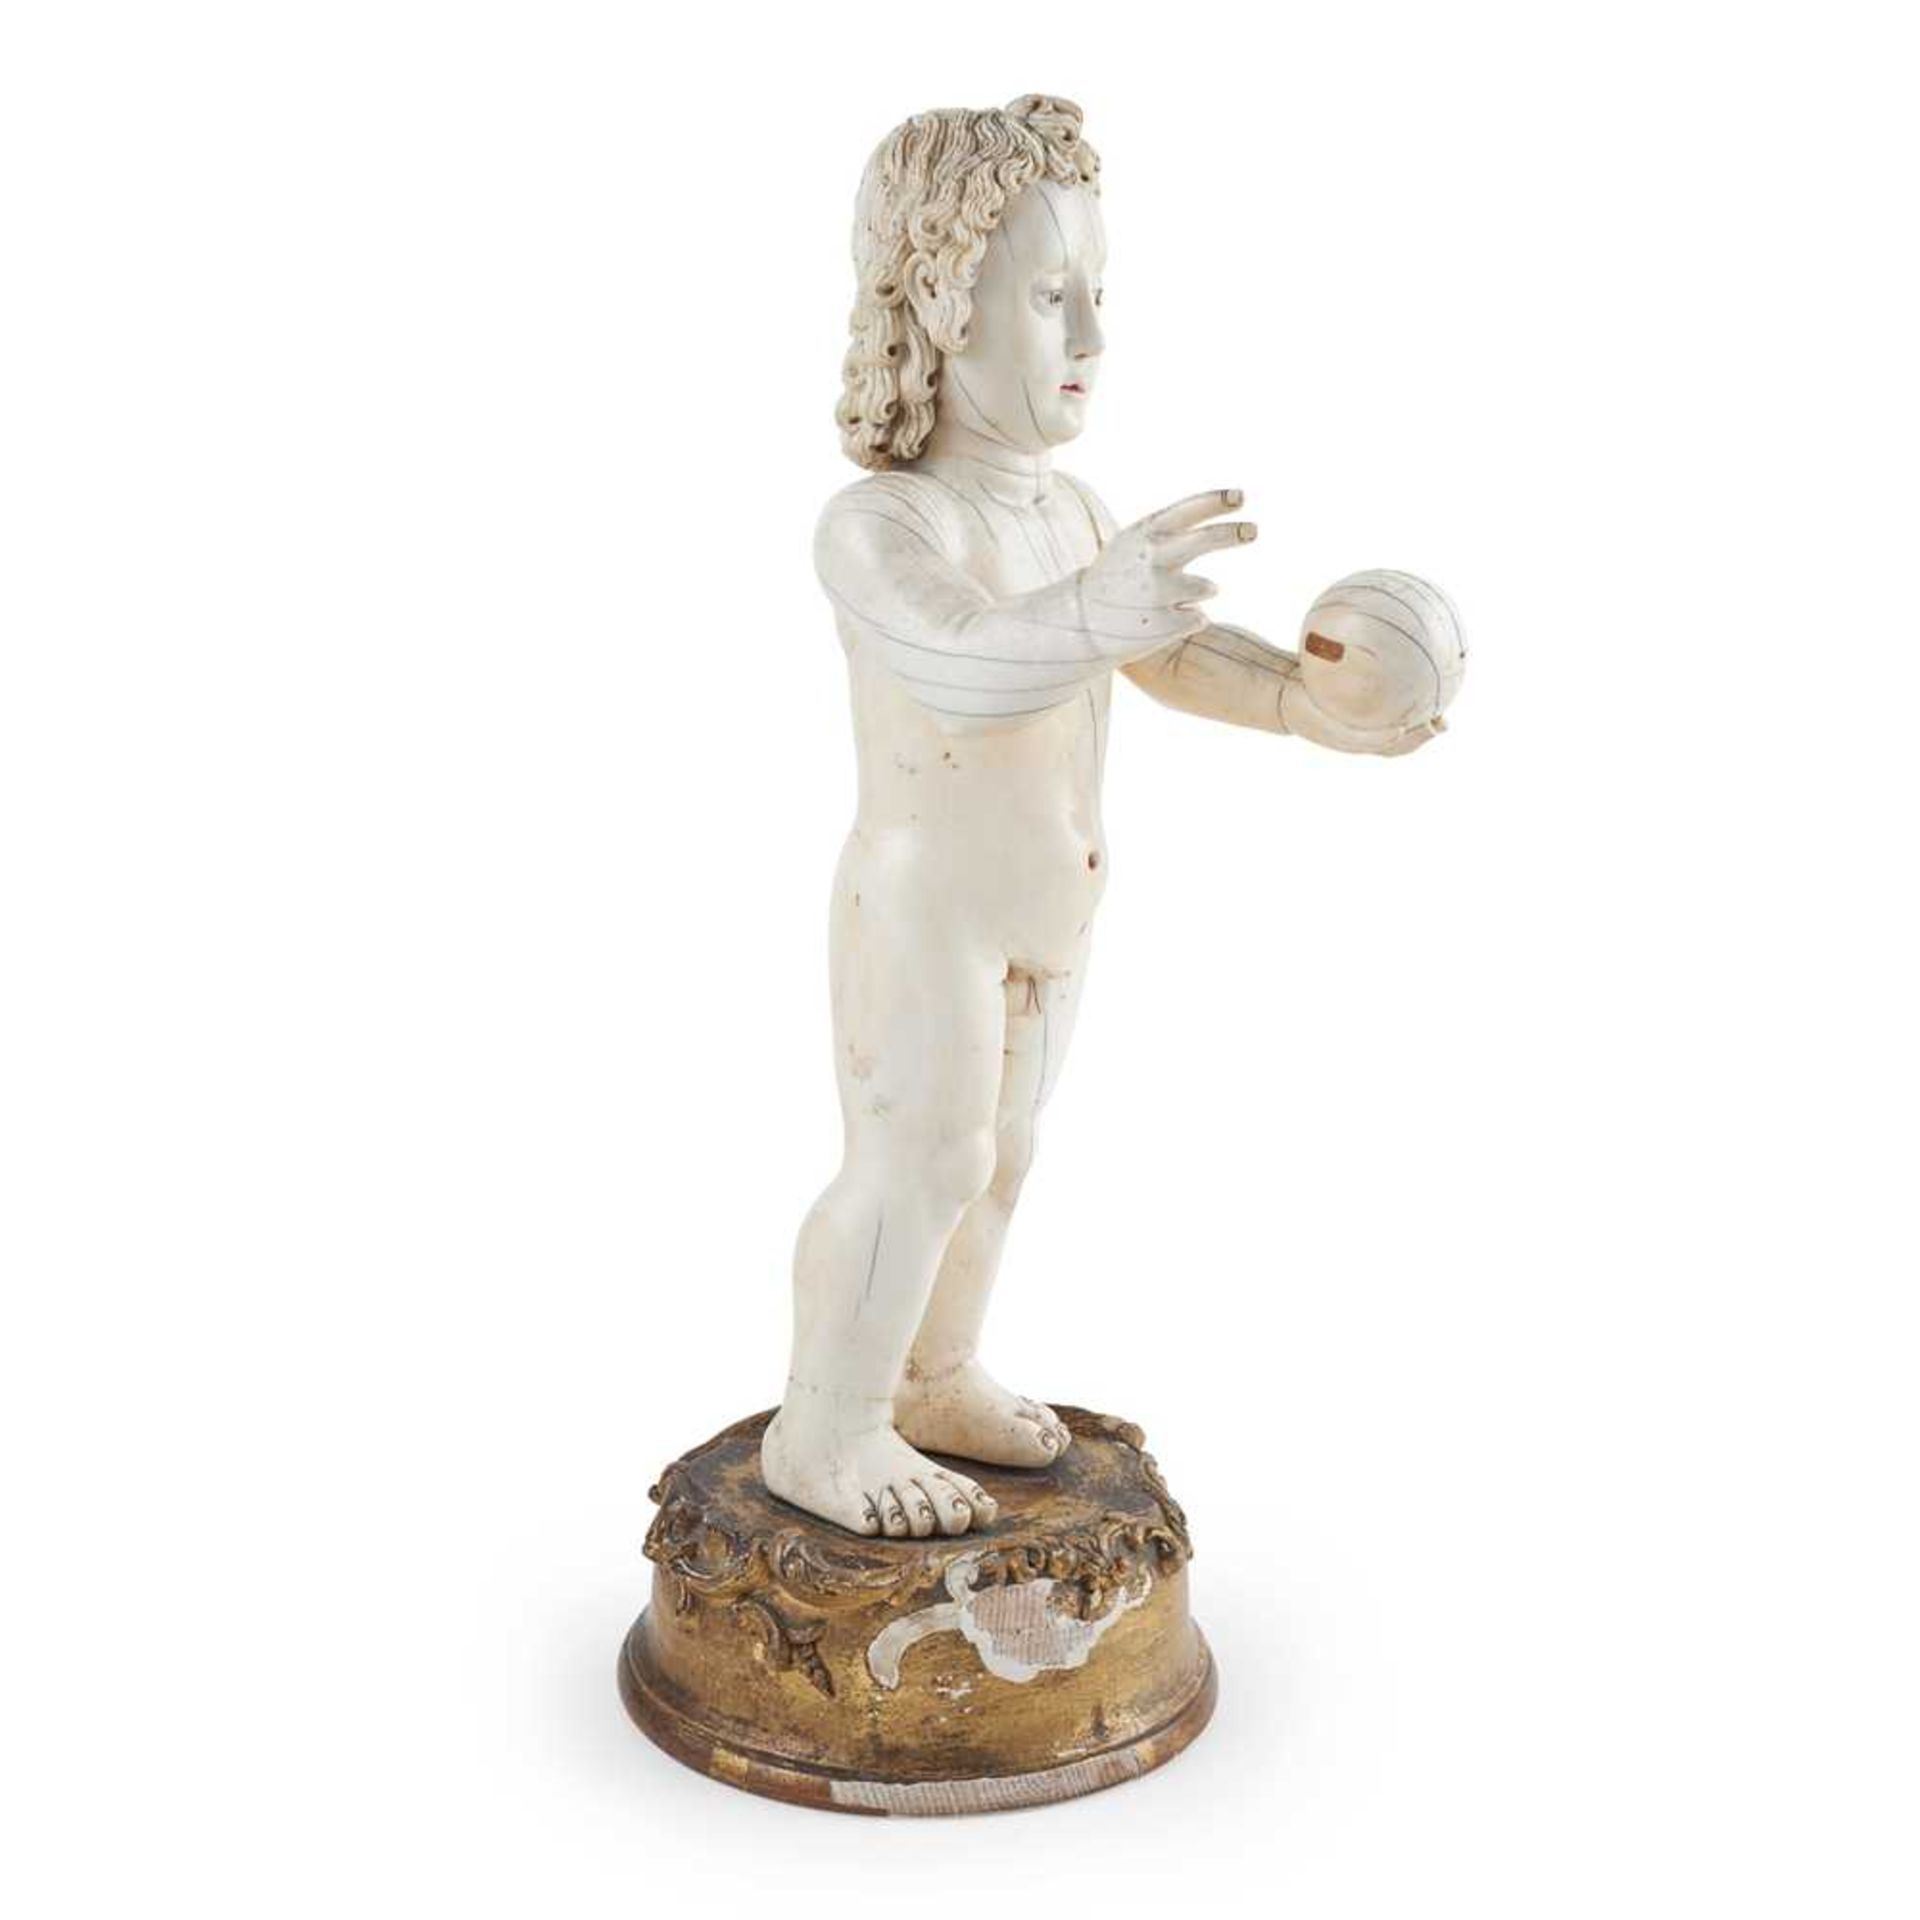 LARGE INDO-PORTUGUESE CARVED IVORY FIGURE OF THE INFANT CHRIST AS SALVATOR MUNDI, THE SAVIOUR OF THE - Image 4 of 7